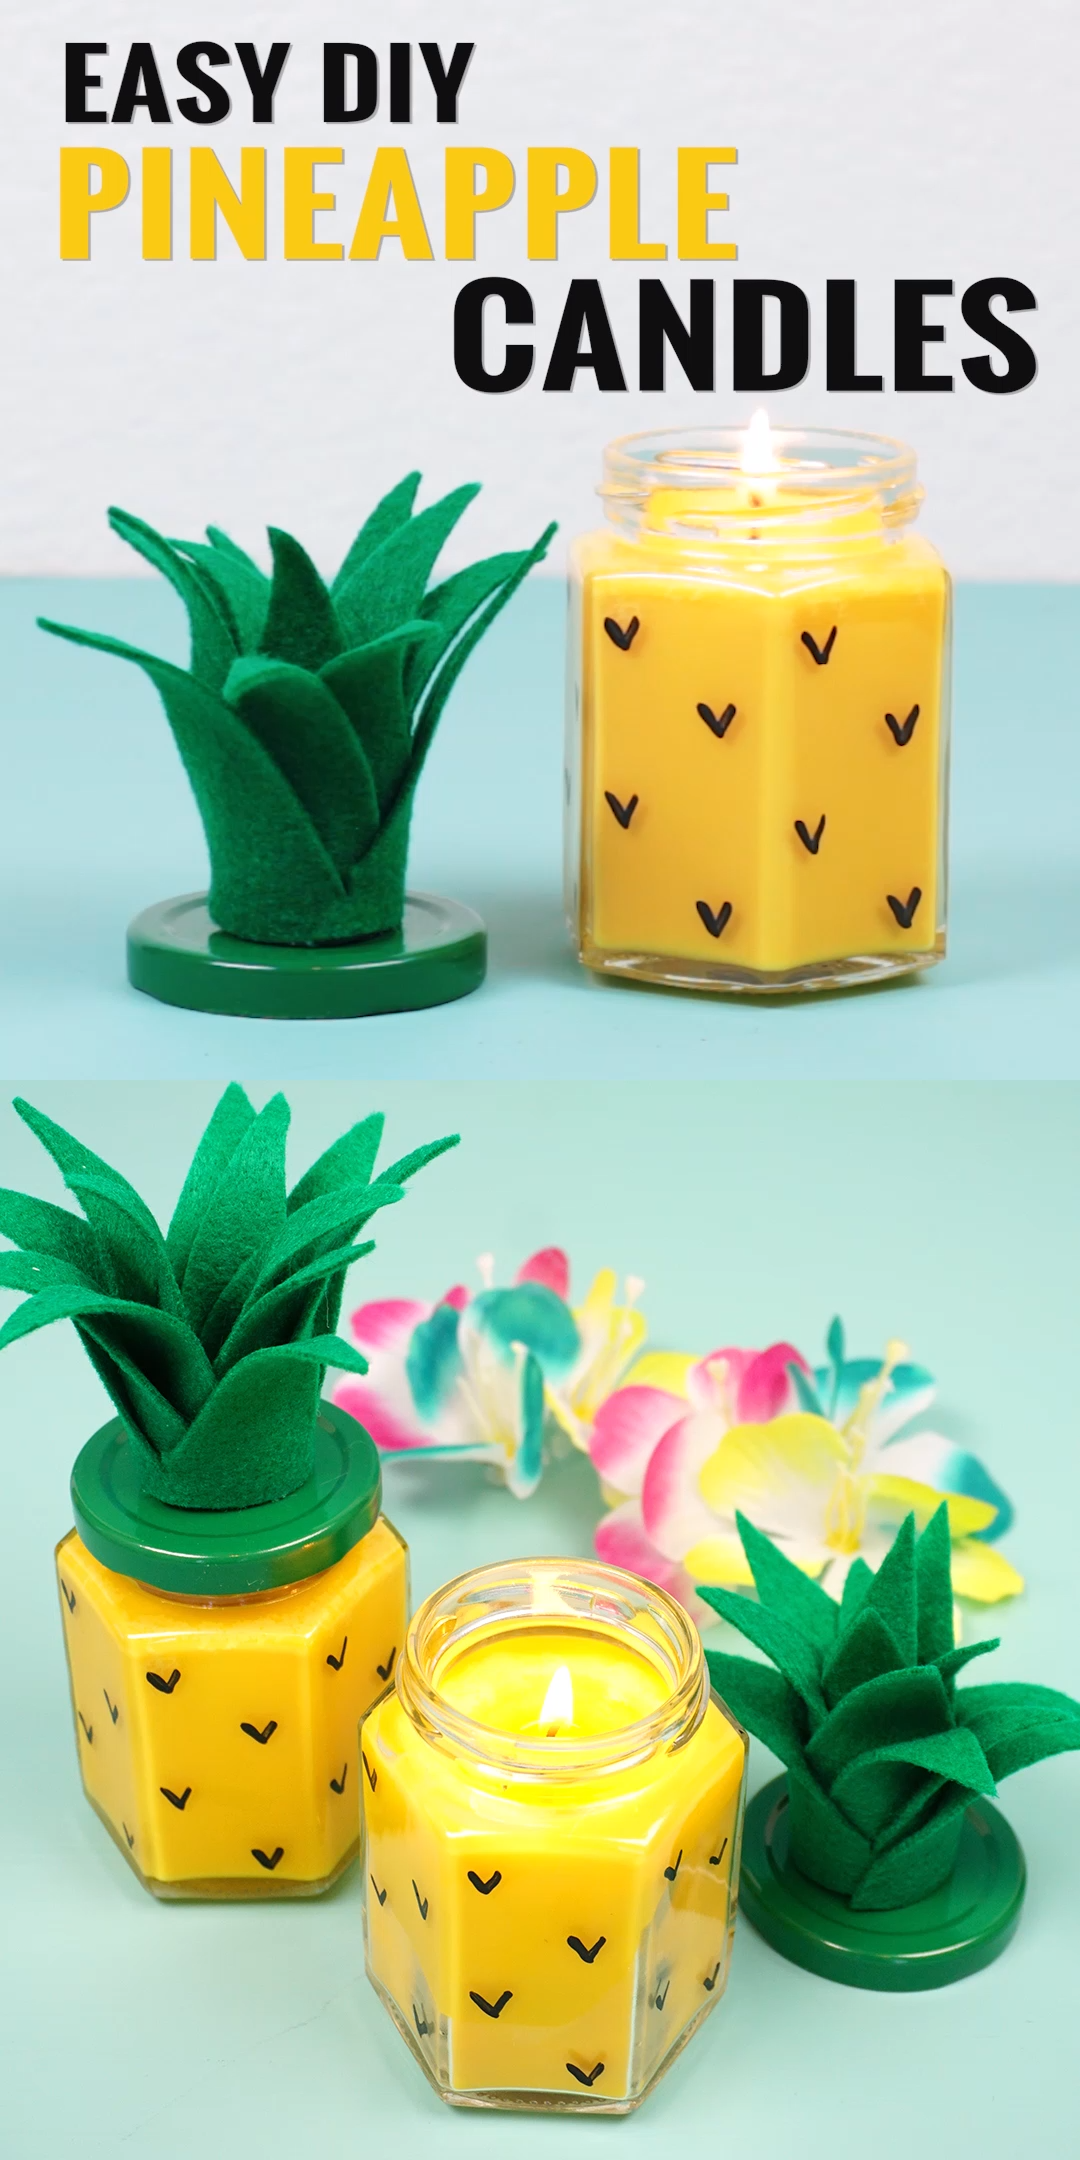 Easy DIY Pineapple Candles - Easy DIY Pineapple Candles -   19 diy Easy gifts ideas